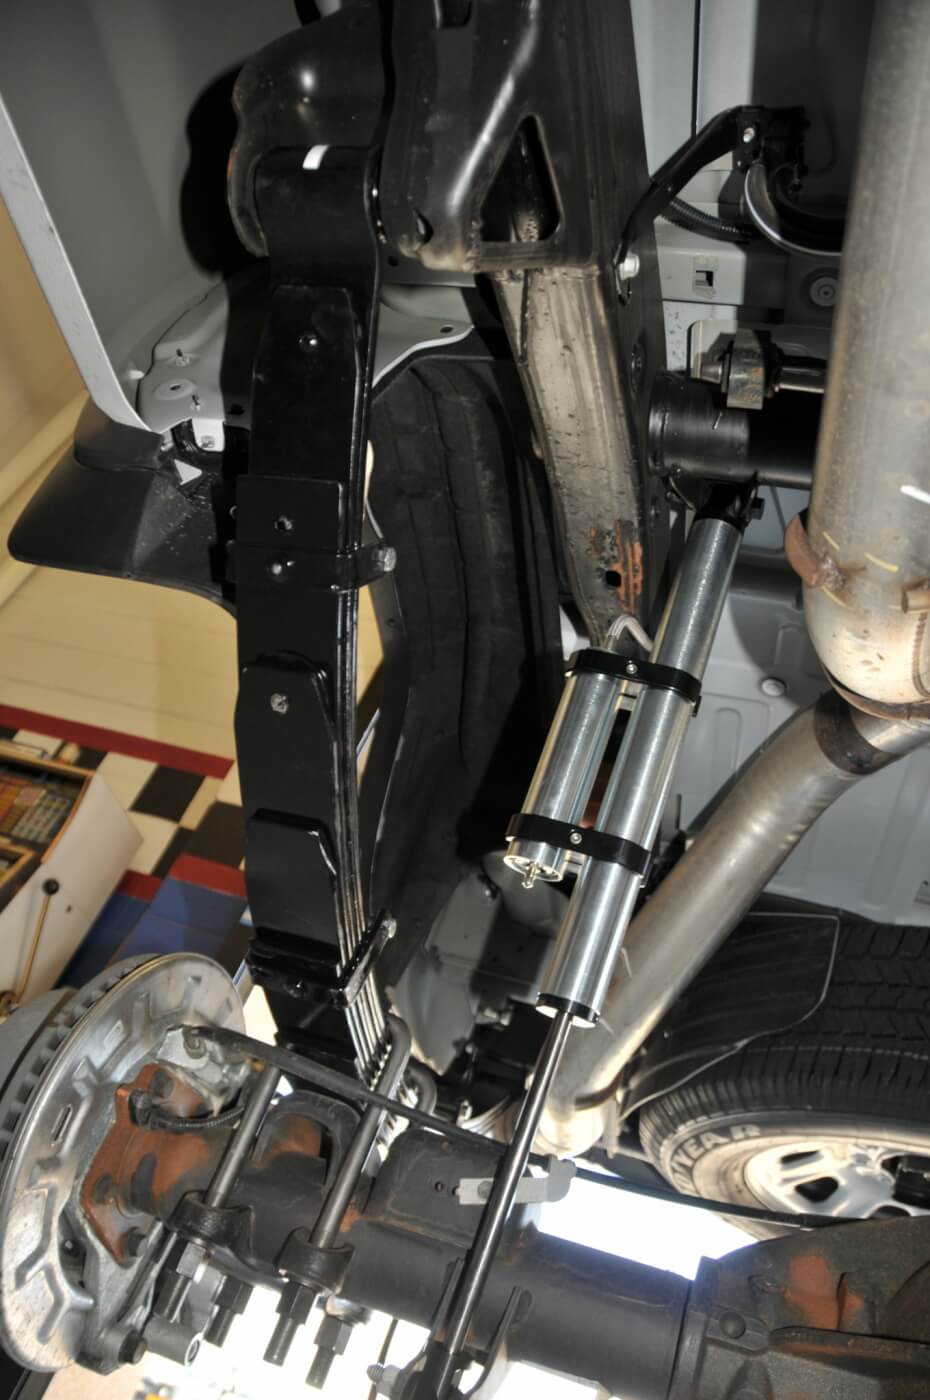 20. Here’s a look at the complete rear suspension. New U-bolts and plates are included in the kit.